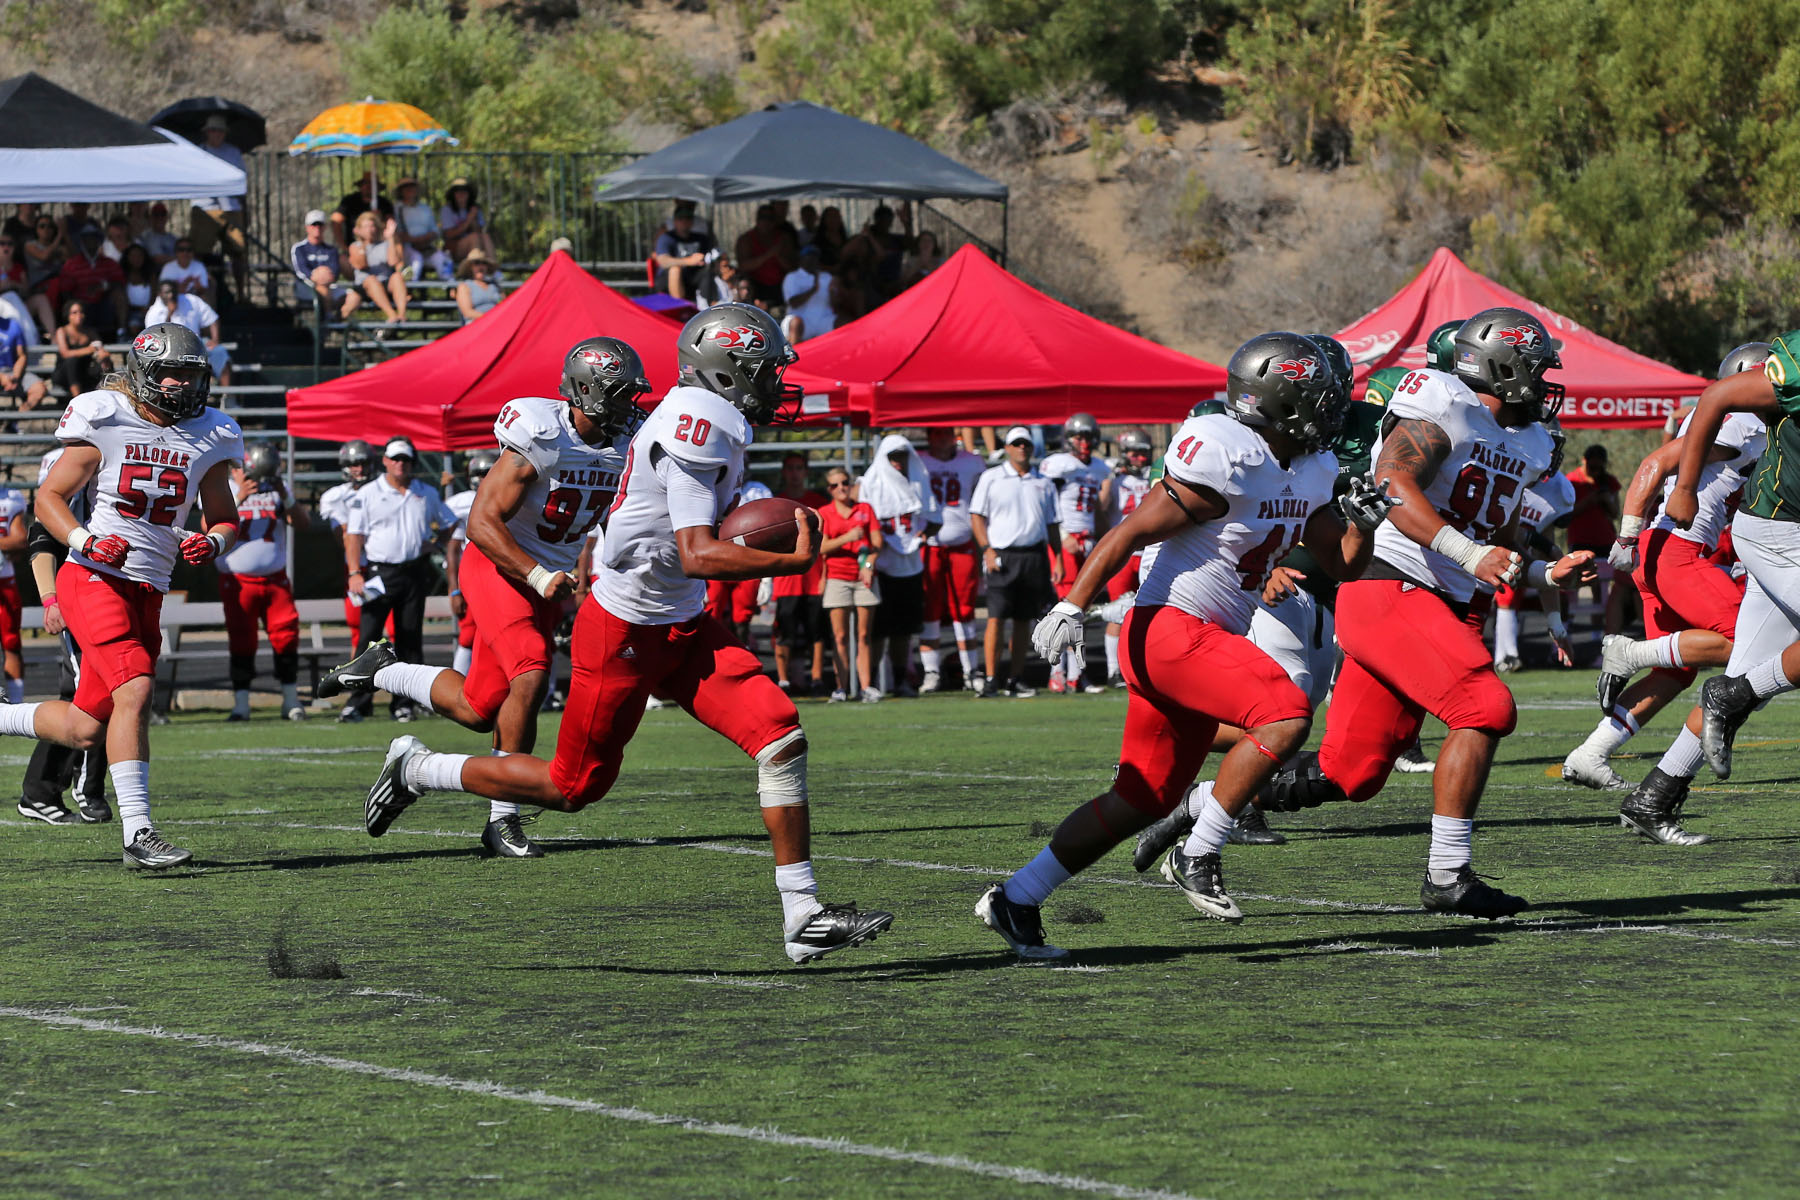 A group of Palomar football players run across a field with the middle player carrying a football in his arms. A crowd of people watch from the bleachers and tents in the background.